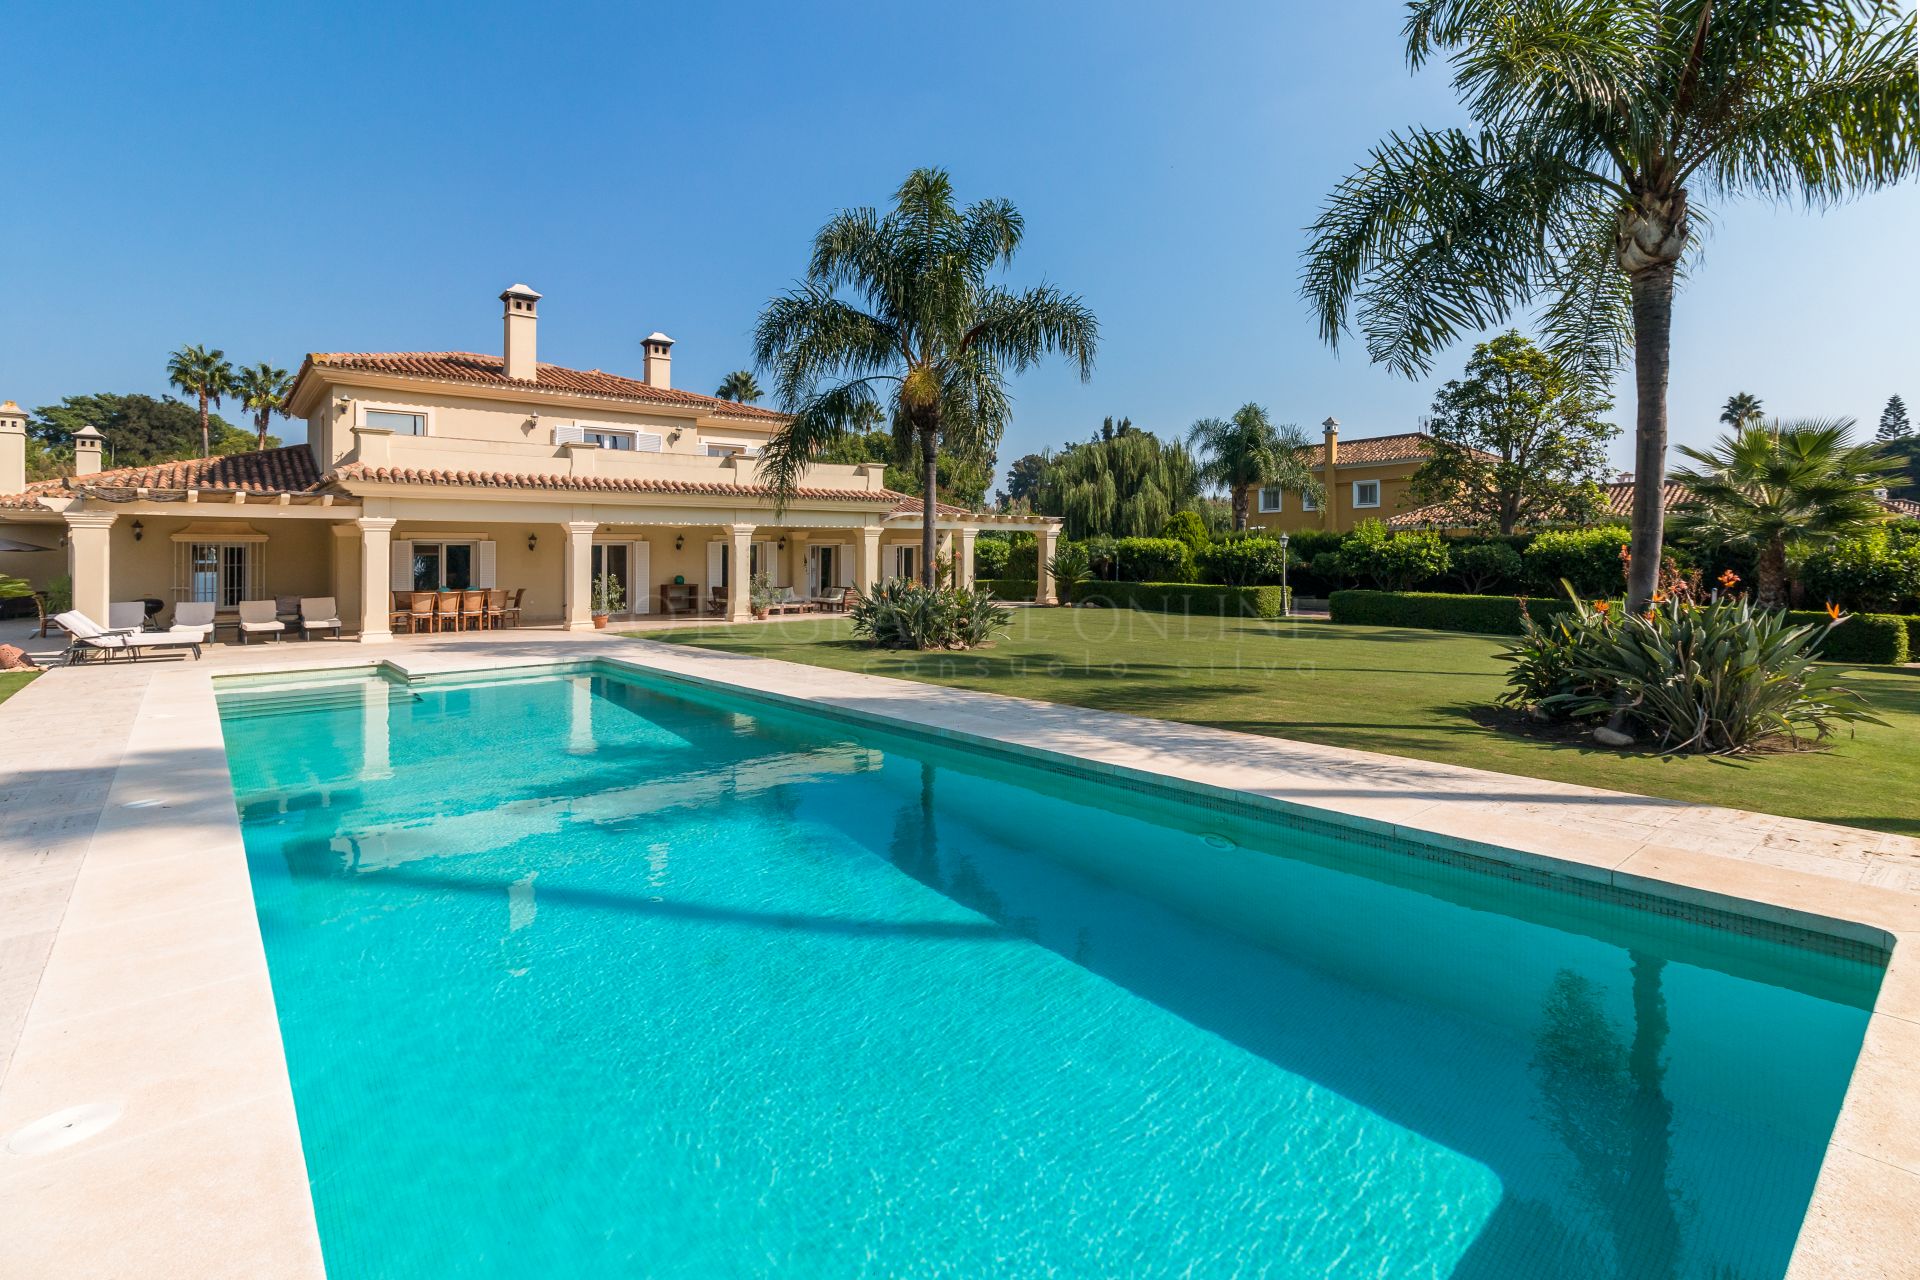 A classic Andalucian style family residence in Kings and Queens